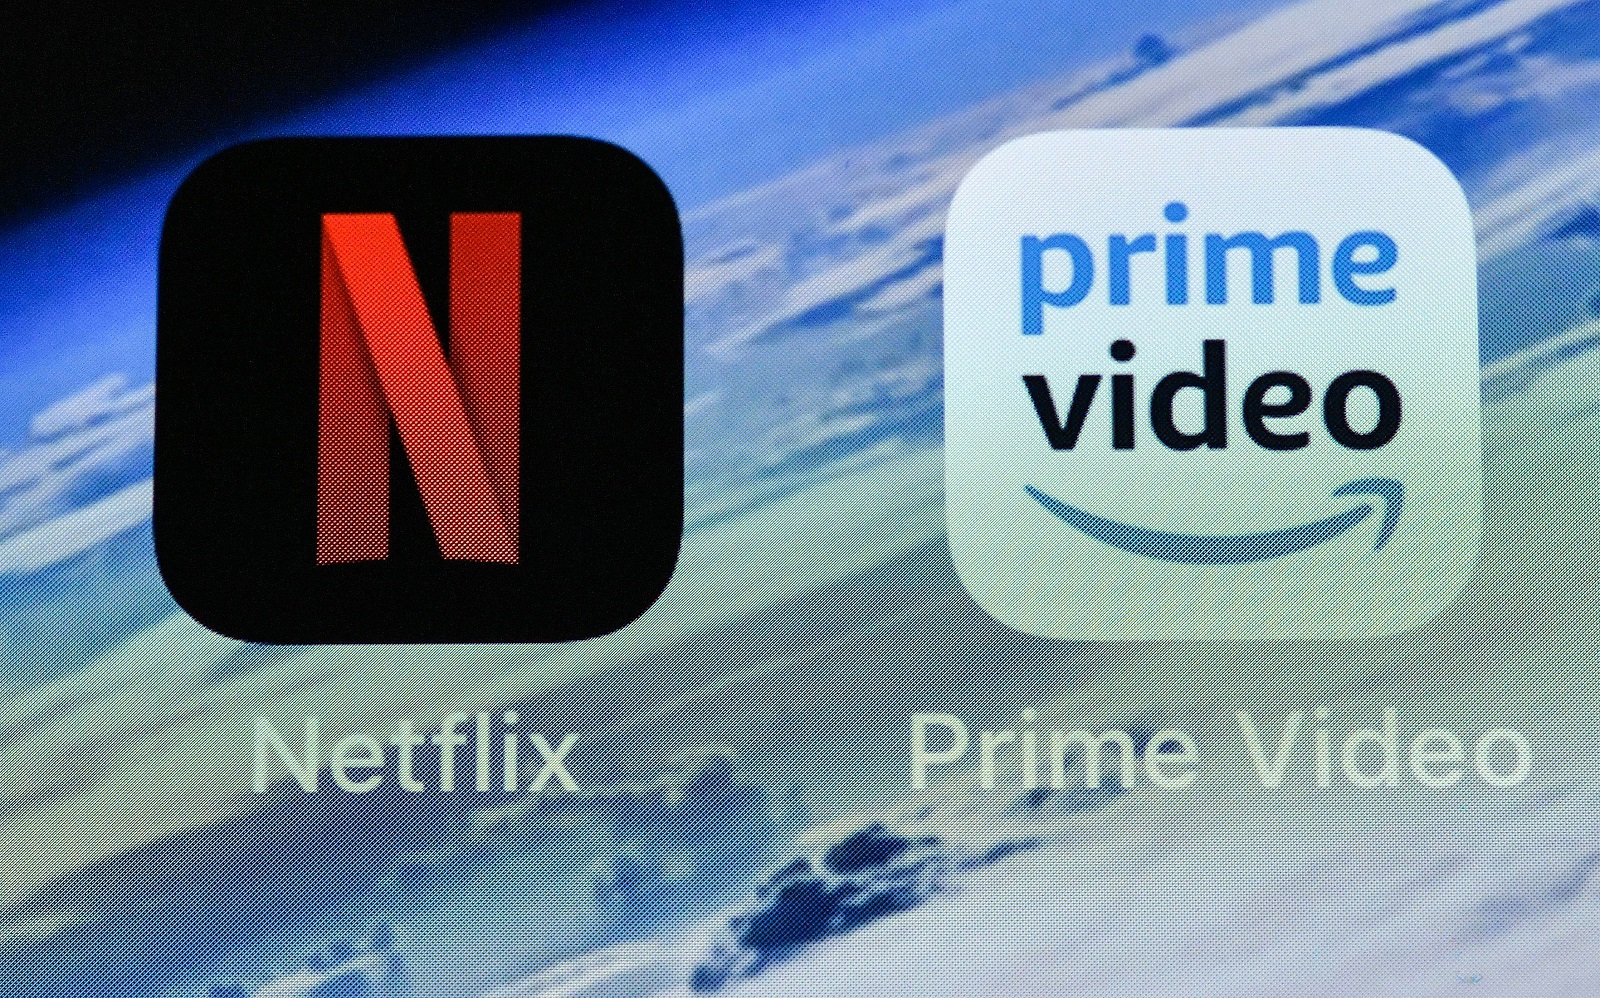 Surprise Amazon Prime Video Has Nearly 5 Times As Many Movies As Netflix Bgr